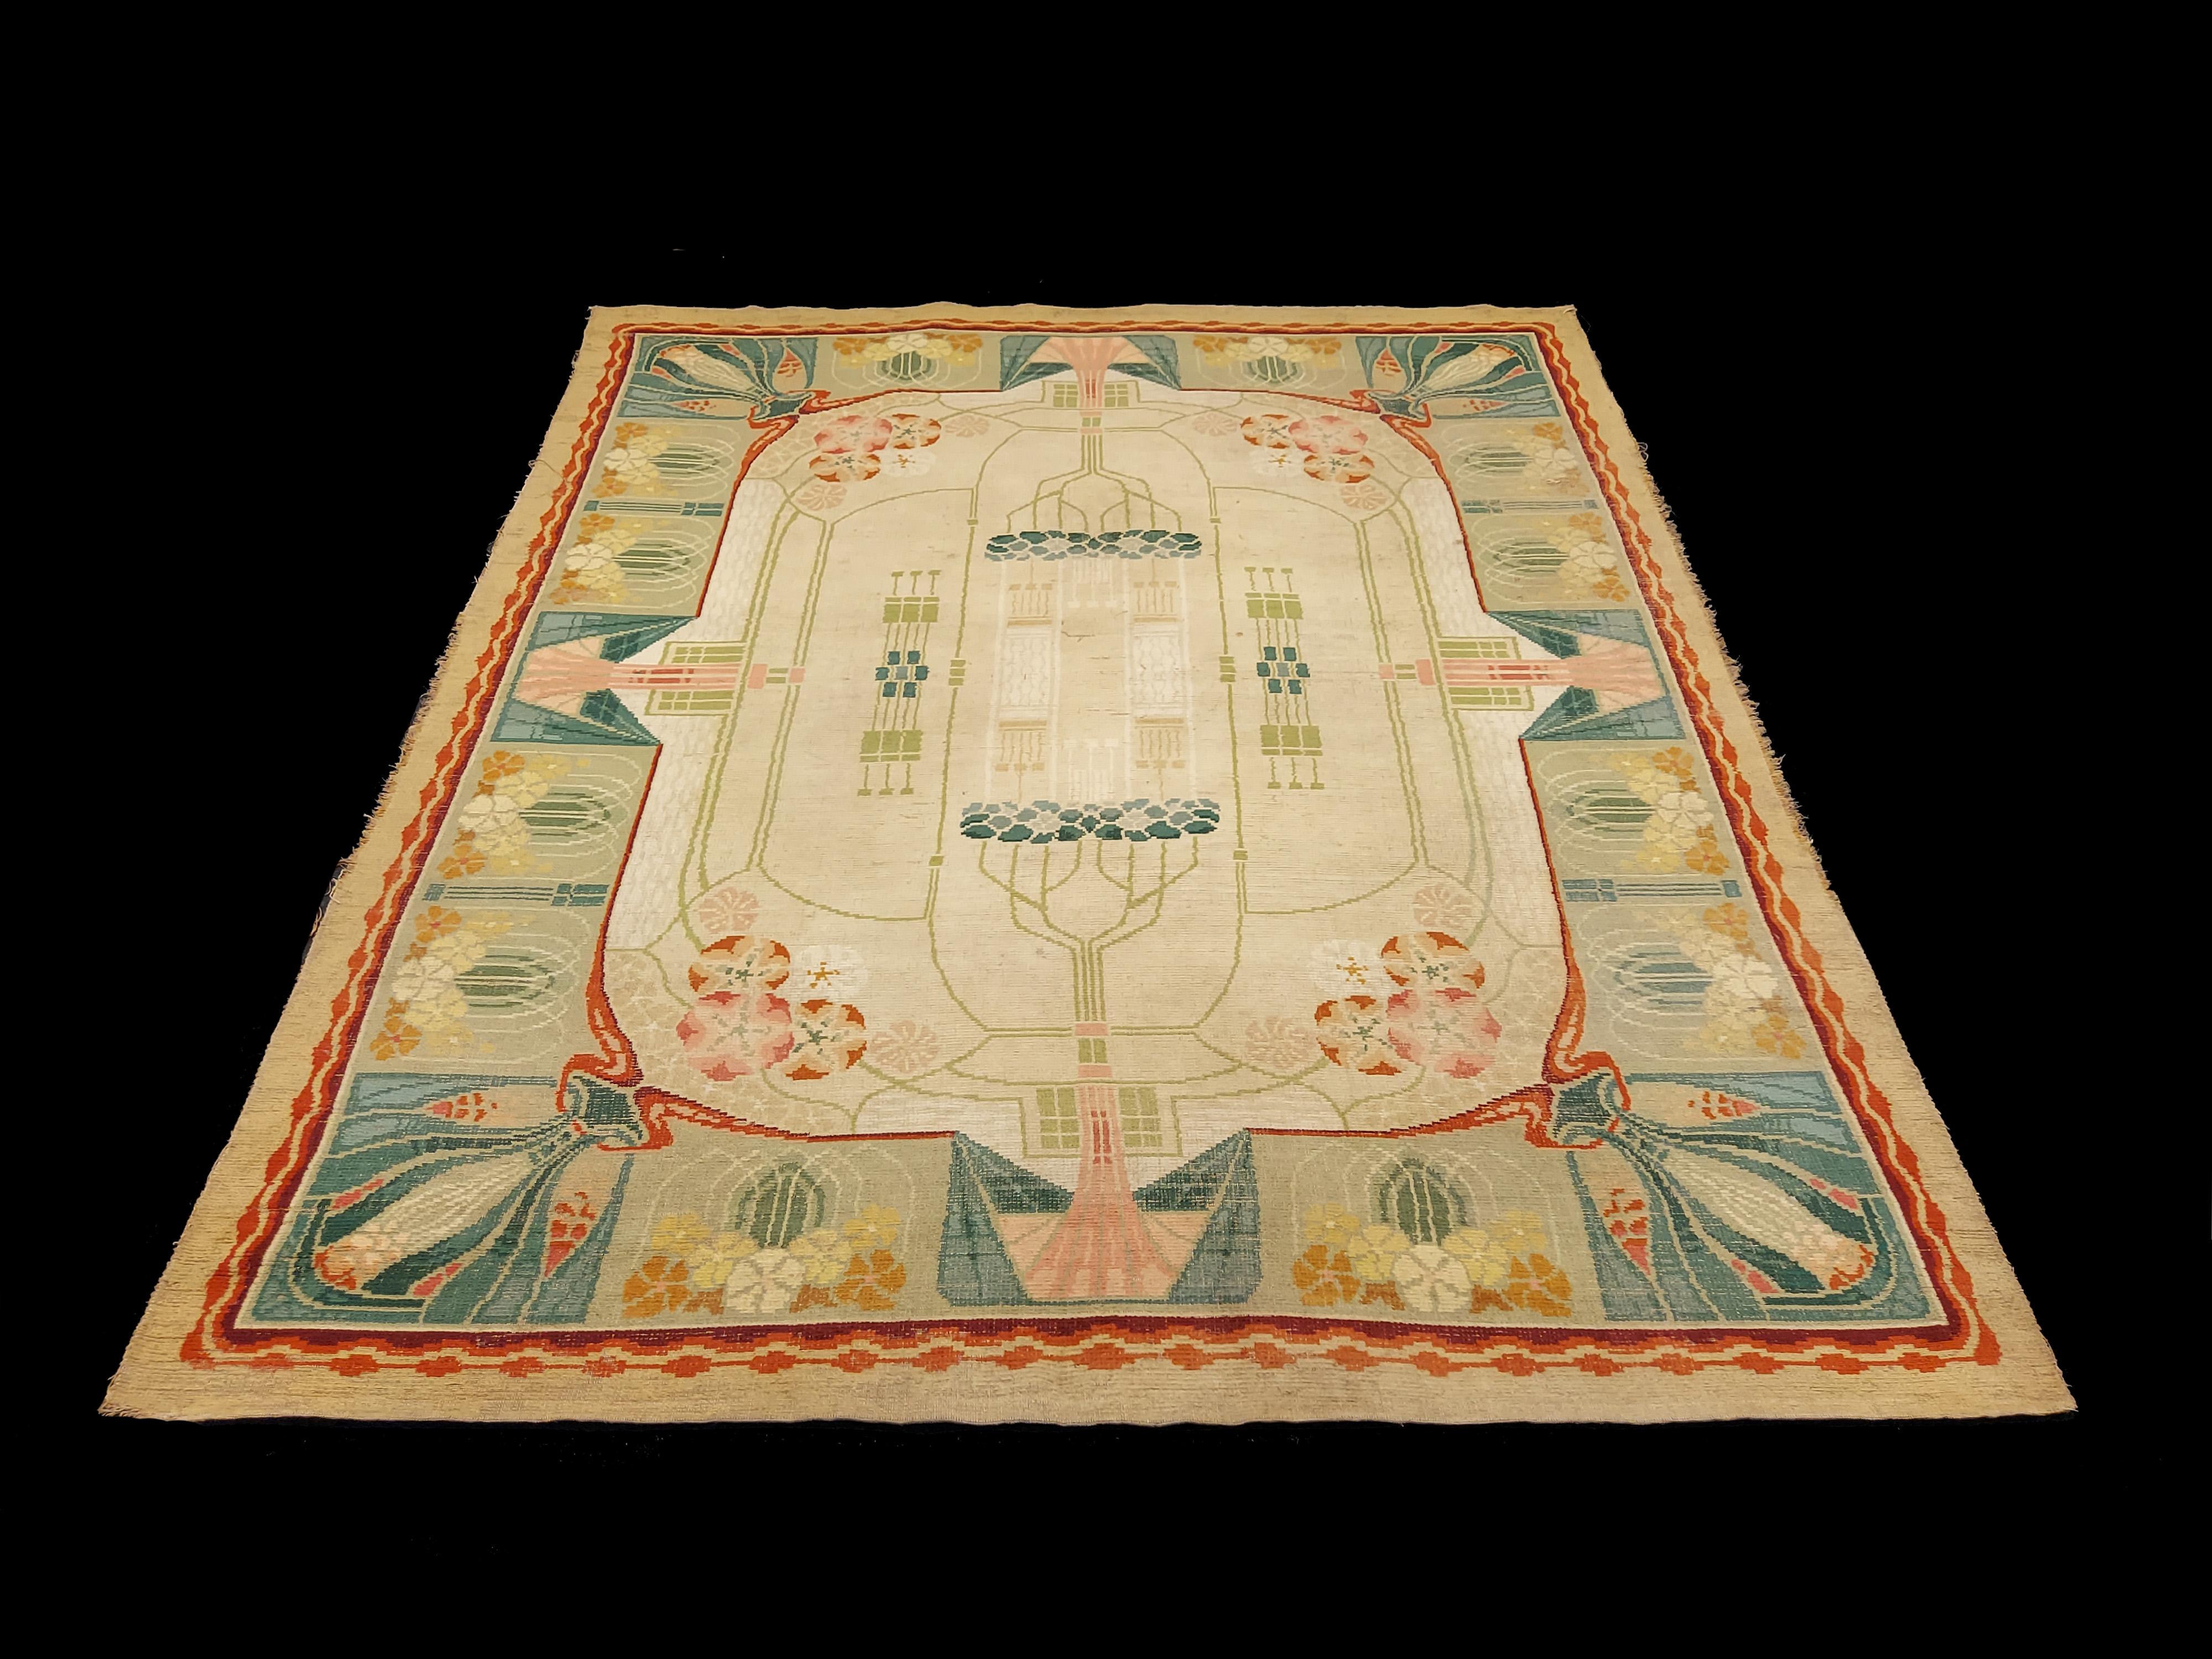 An exceptional and rare European handwoven Art Nouveau rug, in fine wool and perfect condition, dated circa late 19th century (circa 1890), attributed to famed designer Gustave Serrurier-Bovy. With typical art nouveau floral and architectural motifs